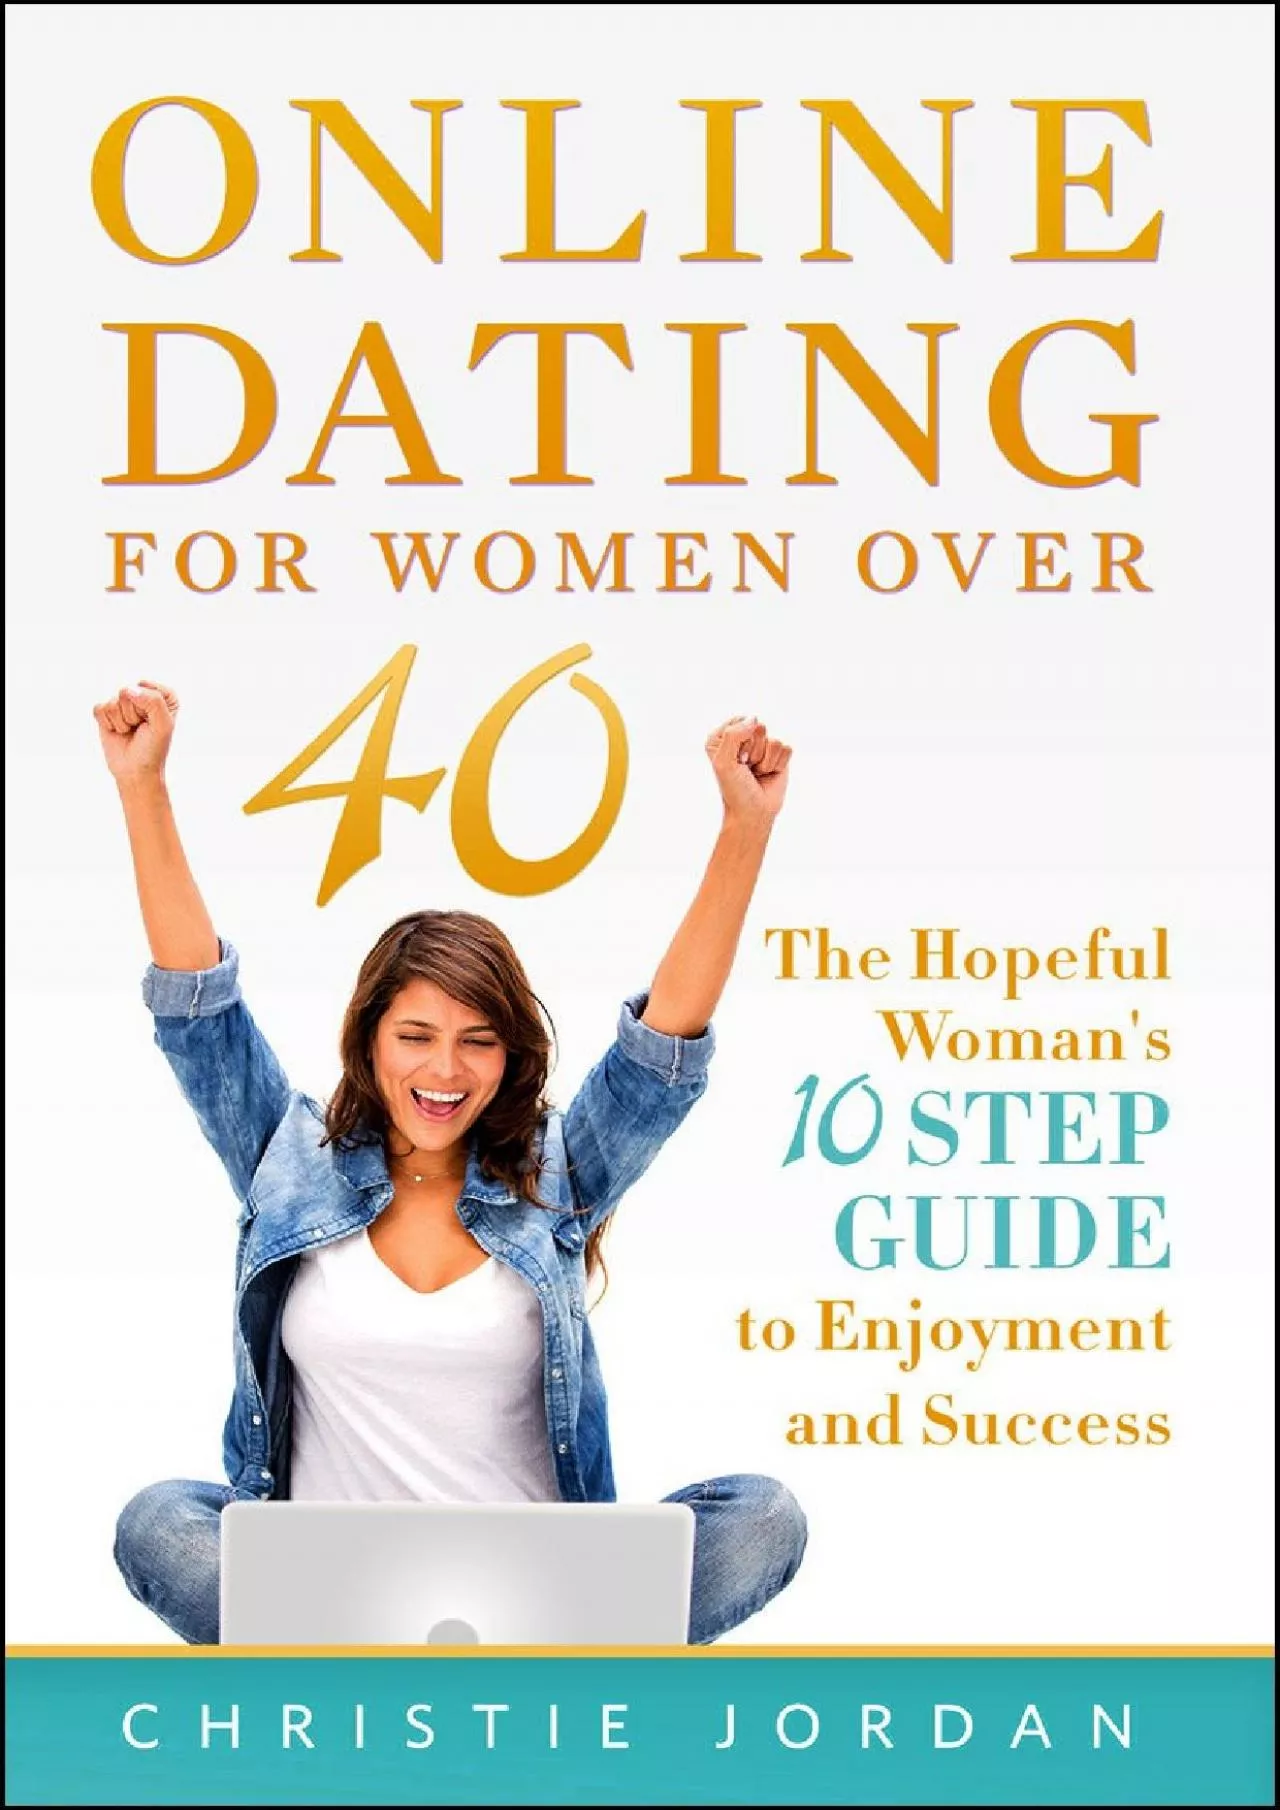 (BOOK)-Online Dating For Women Over 40 The Hopeful Woman\'s 10 Step Guide to Enjoyment